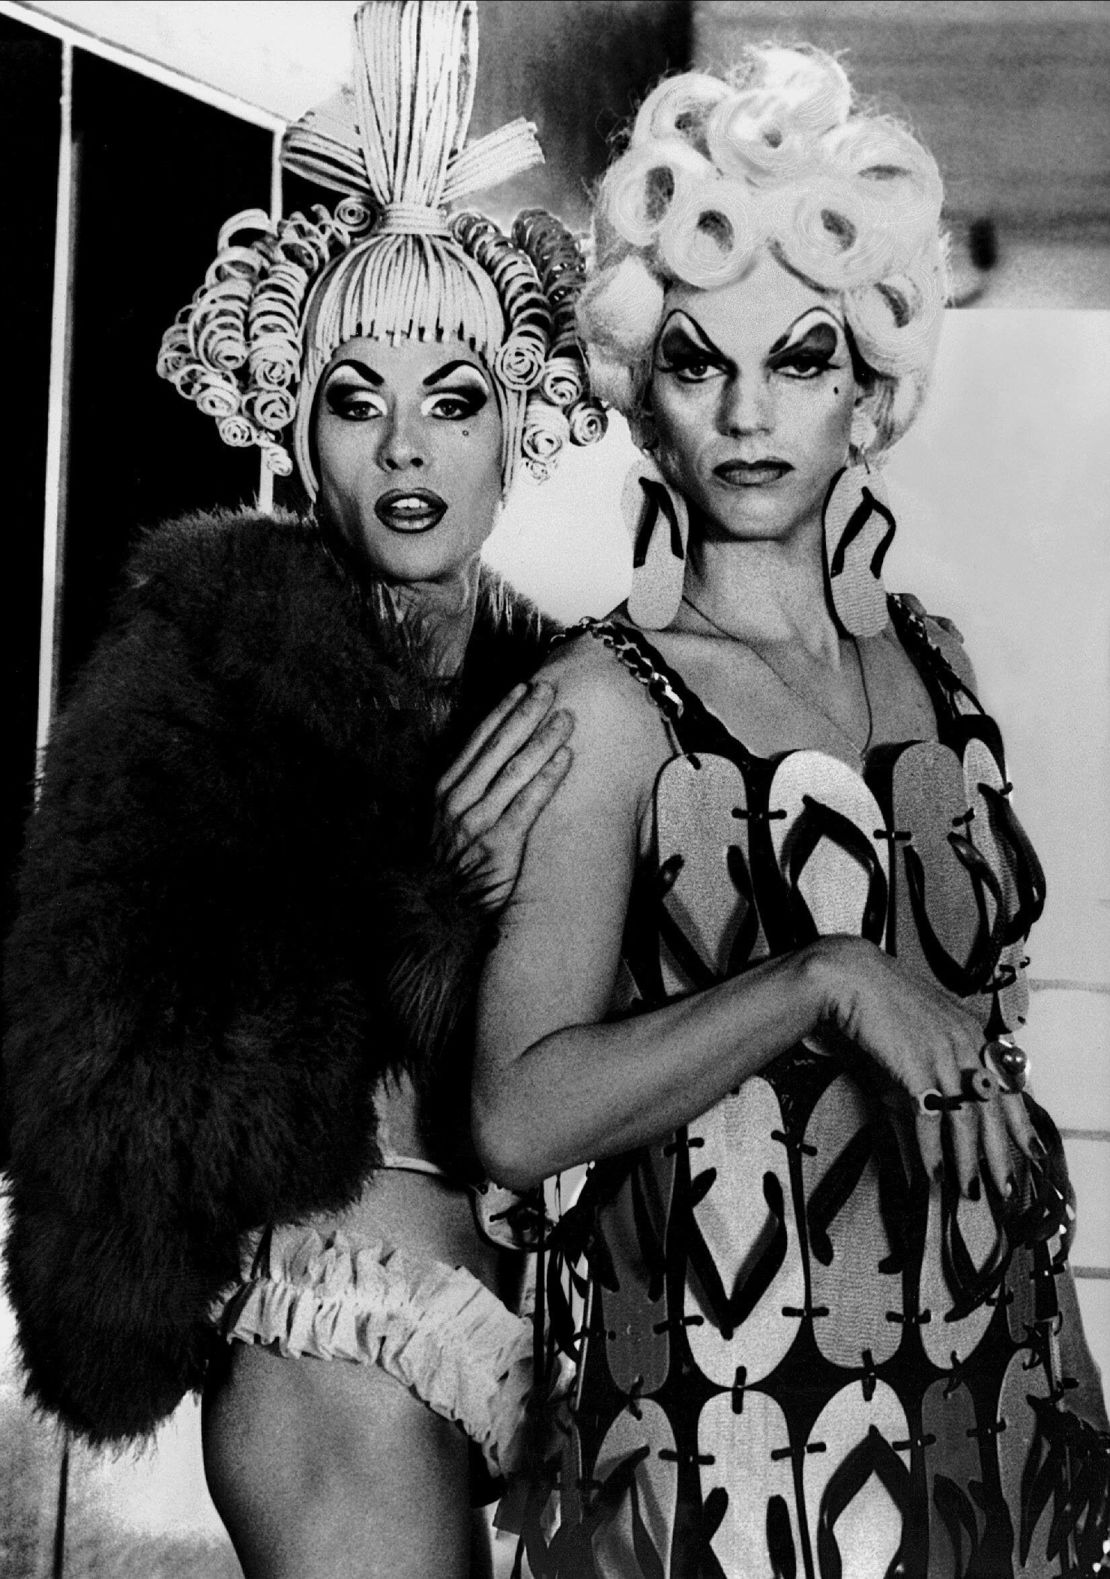 The plastic wig worn by Felicia Jollygoodfellow and the flip-flop dress worn by Mitzi Del Bra have become some of the film's most iconic looks.